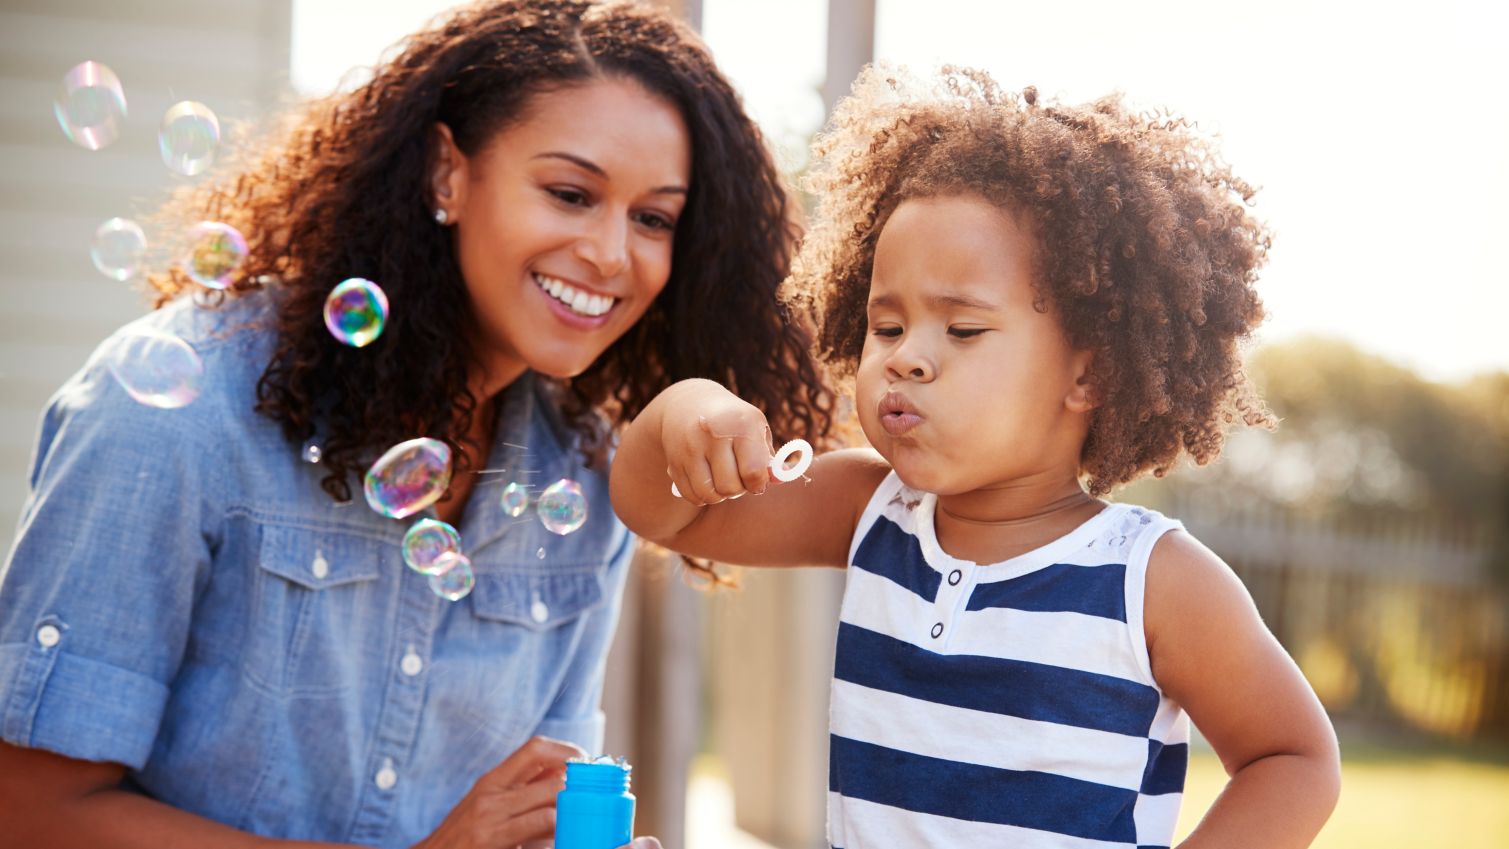 Young child blows bubbles outside while mother looks on